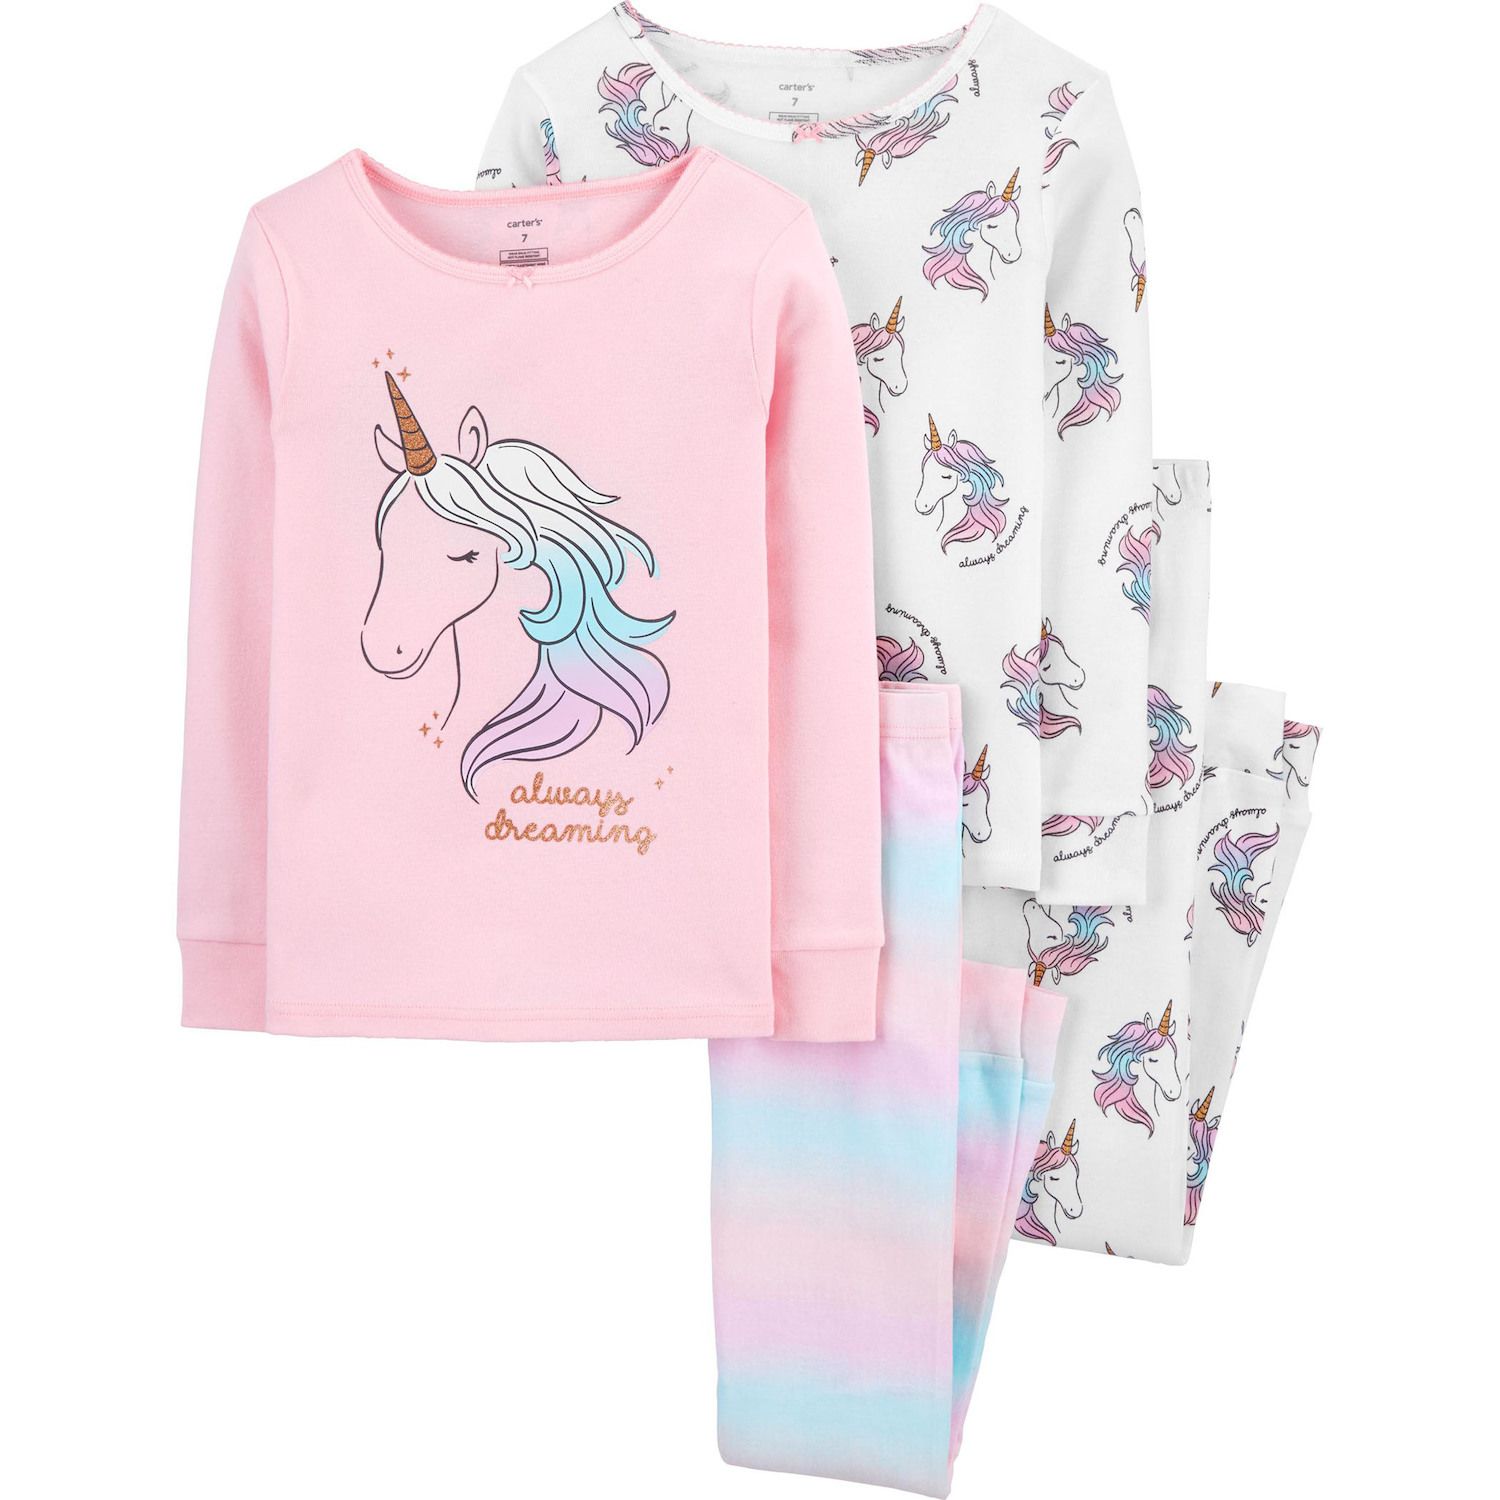 Girls' Clothes | Kohl's